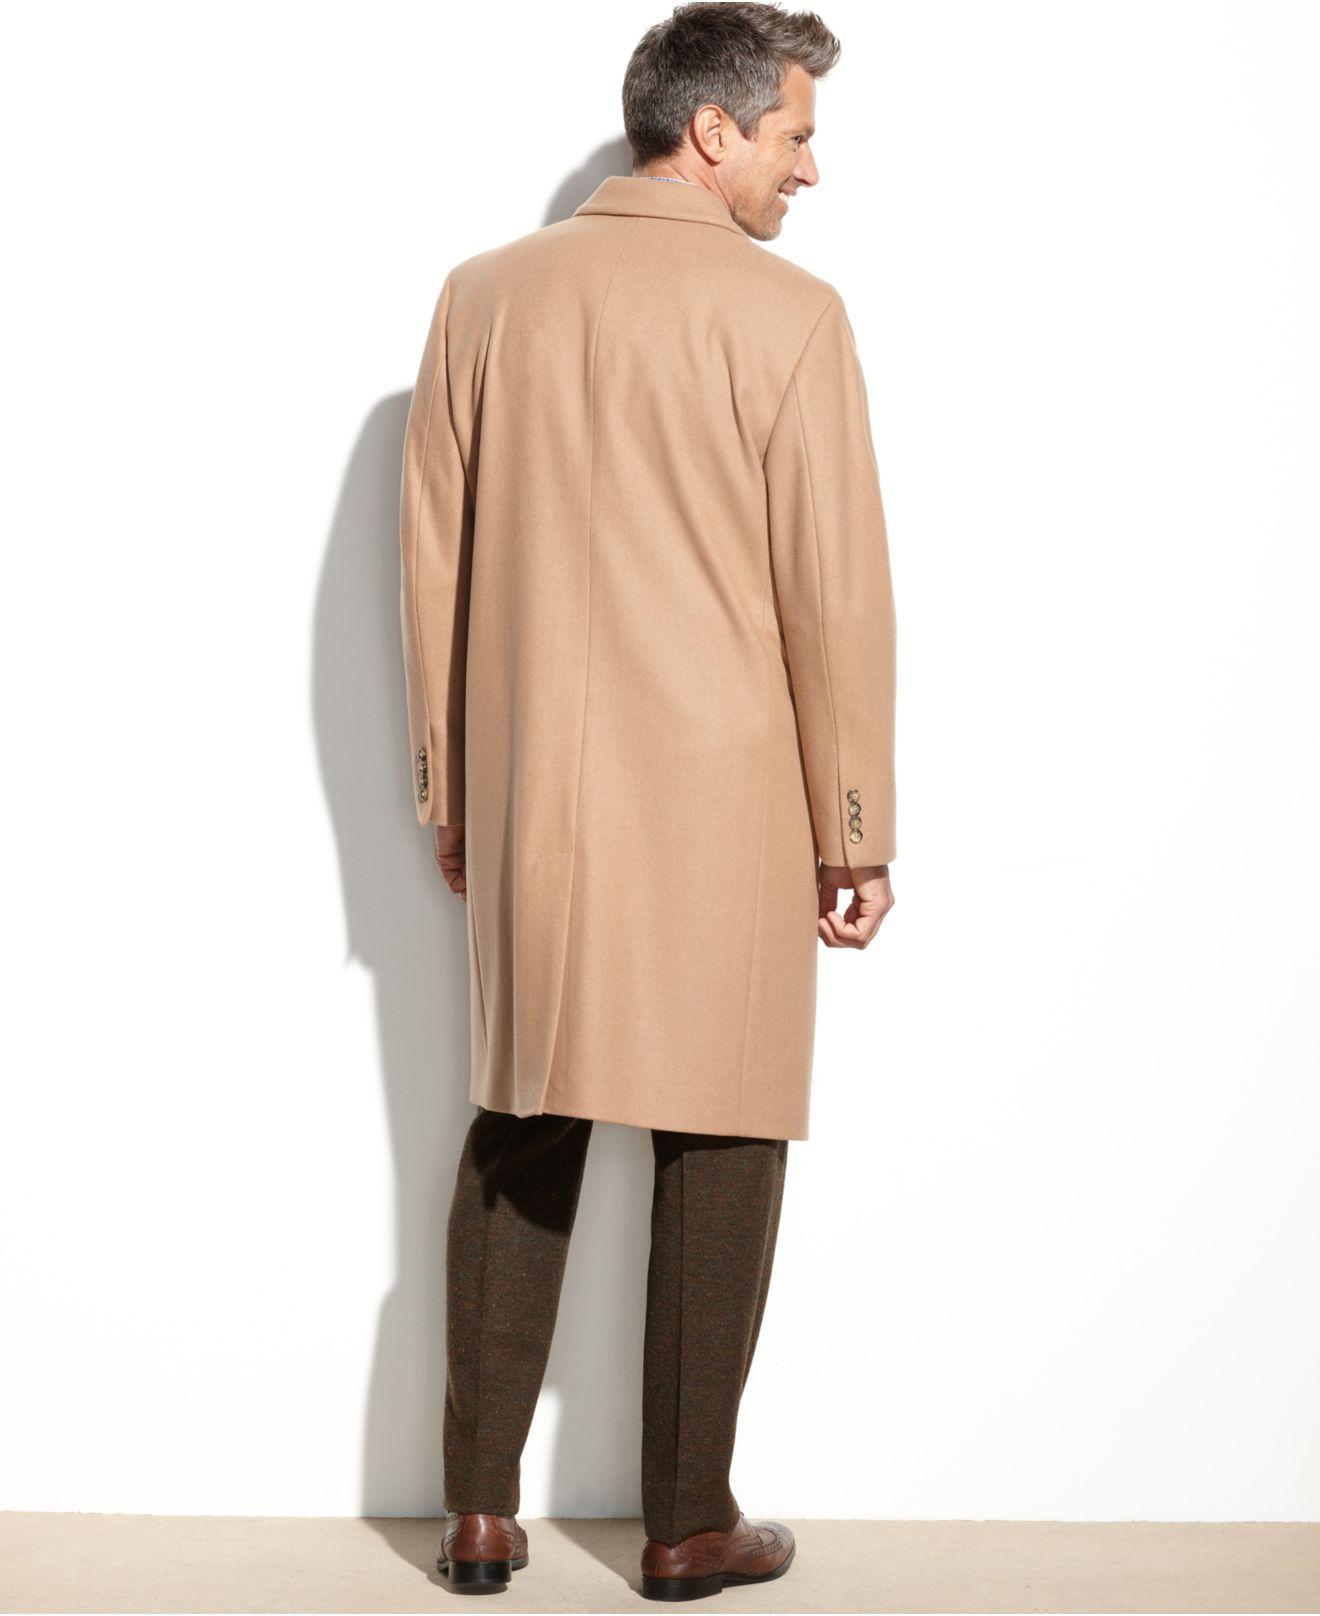 London Fog Big And Tall Signature Wool-blend Overcoat in Camel 